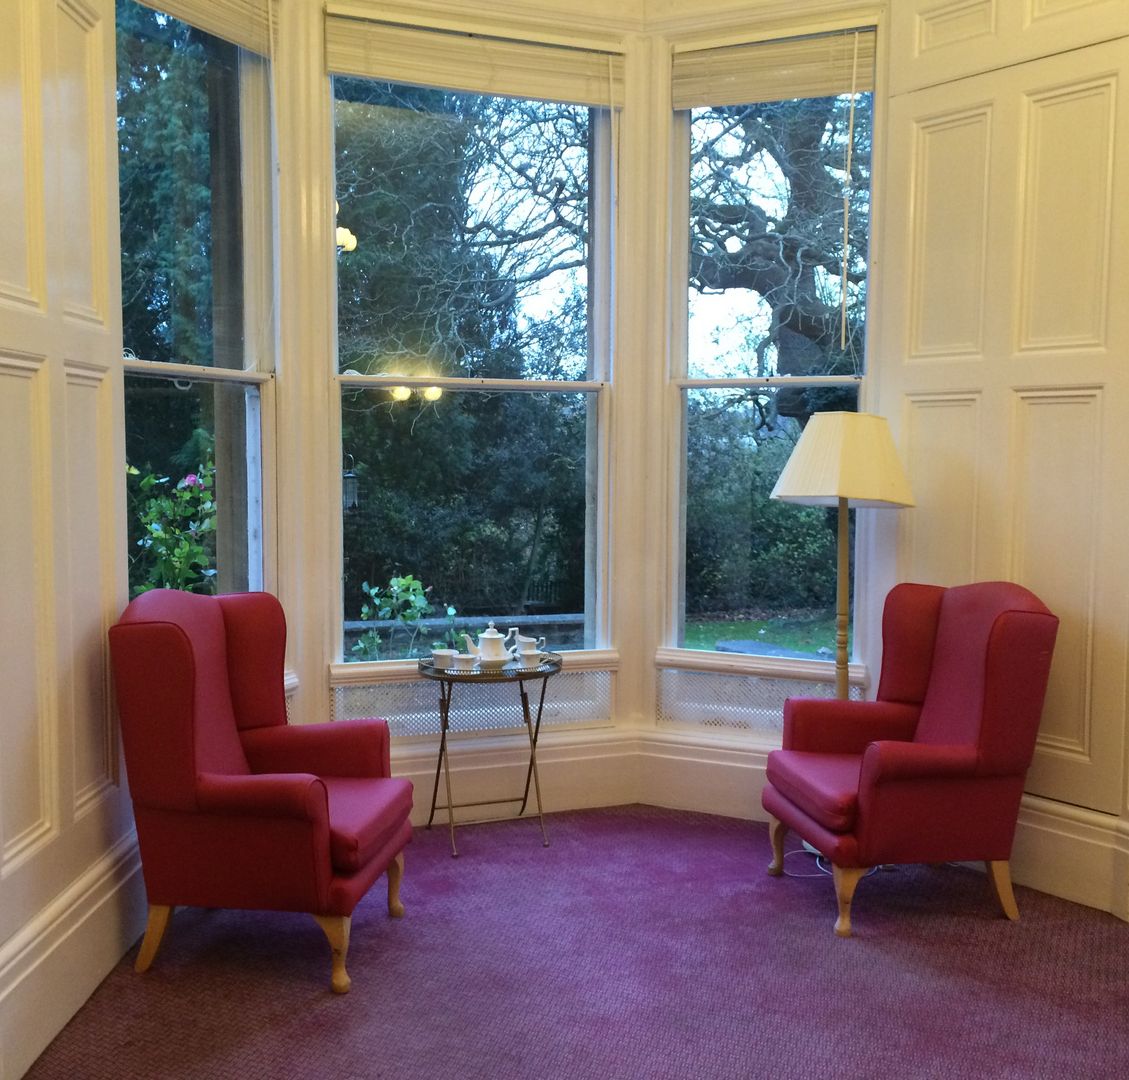 Seating in a window for a cup of tea at Hazelwood Gardens Nursing Home